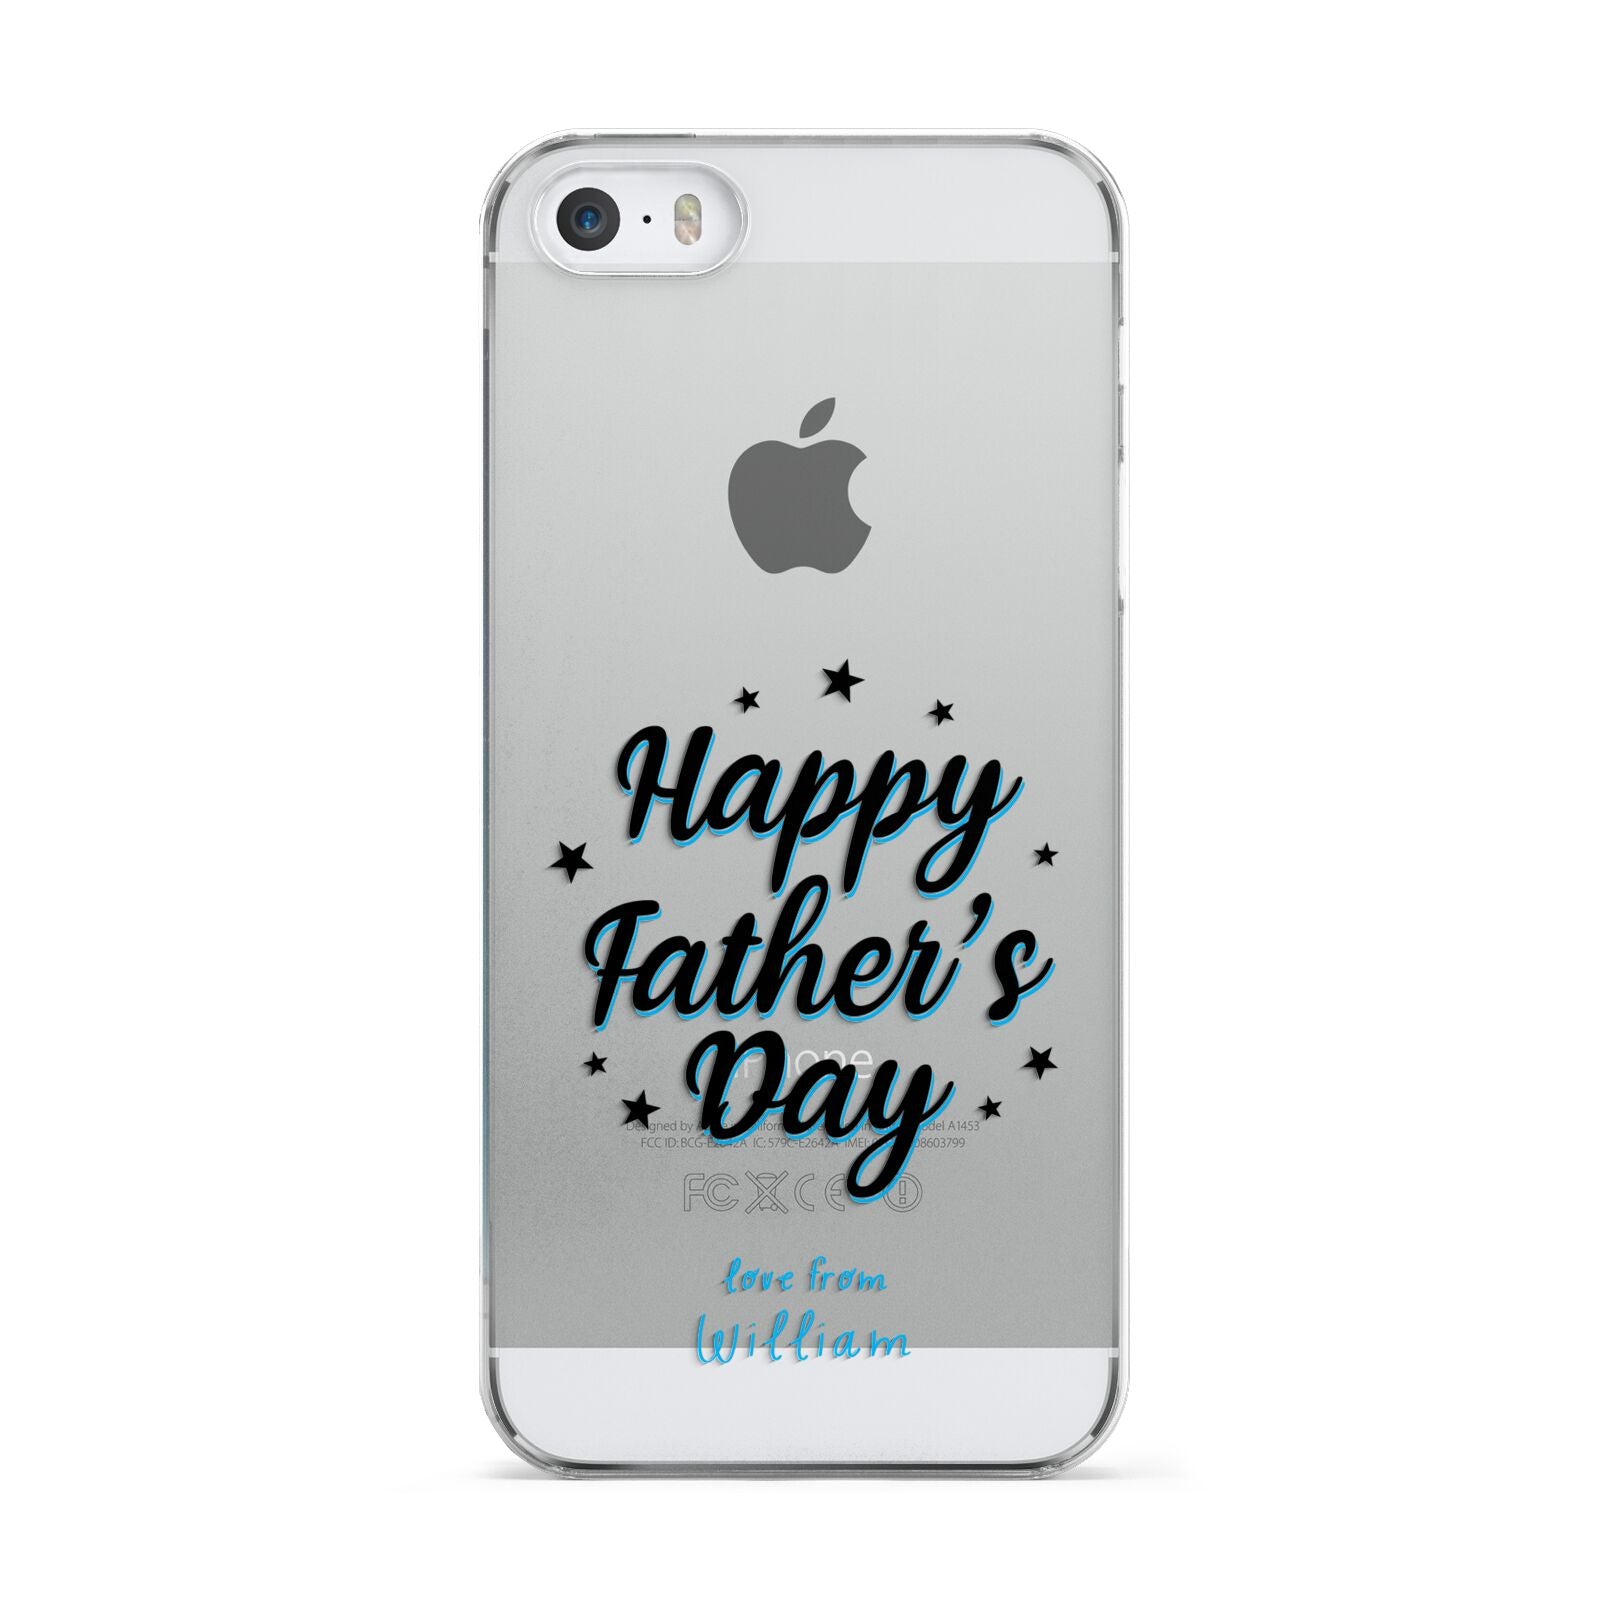 Fathers Day Apple iPhone 5 Case